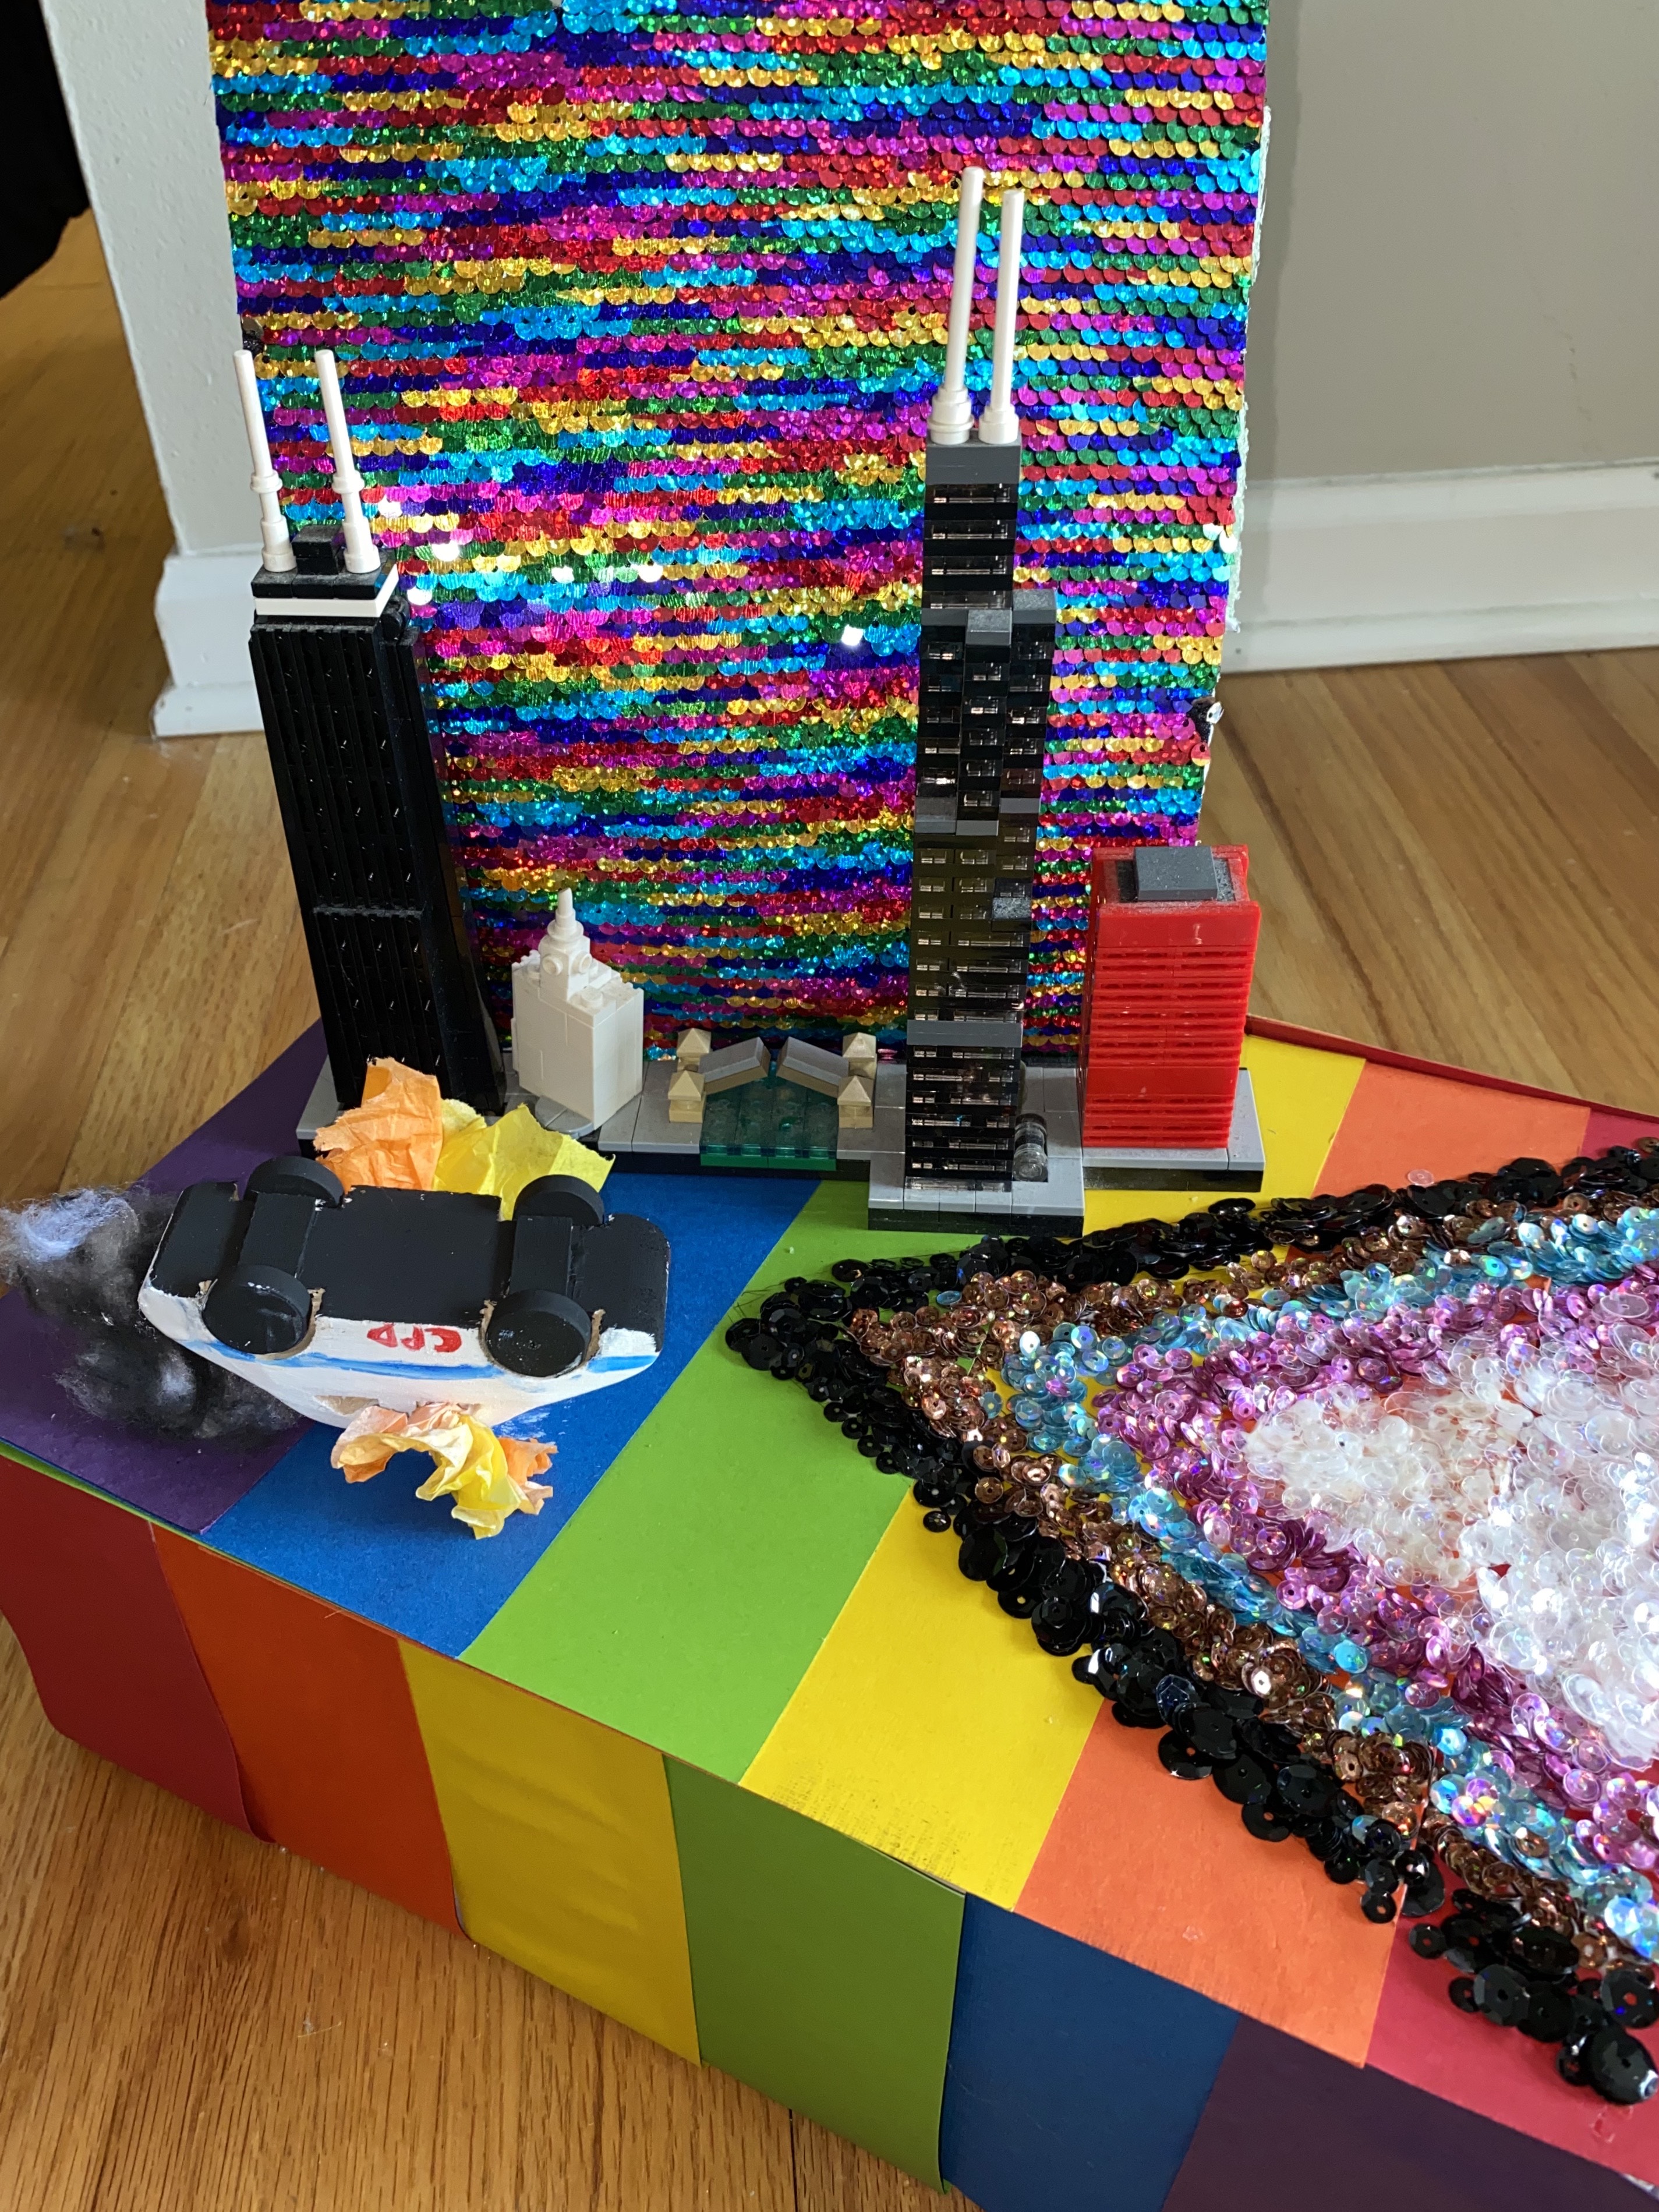 miniature pride float featuring the chicago skyline, a trans flag with black and brown lines added, and a burning cop car